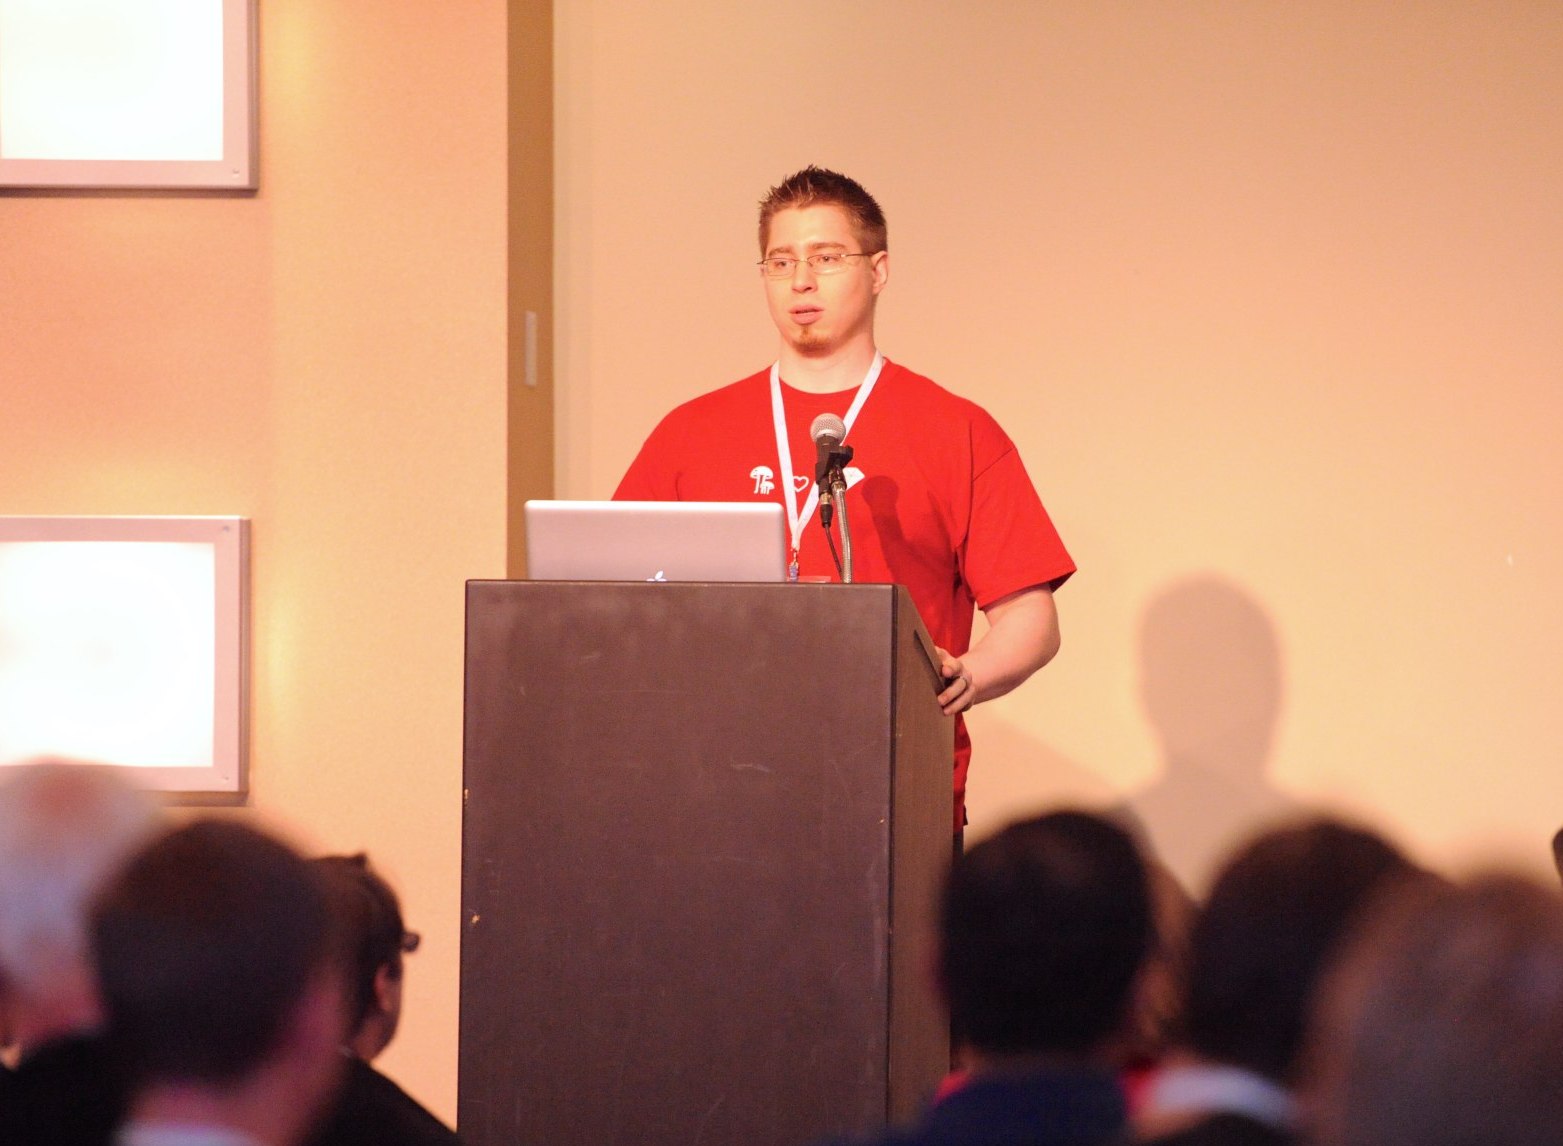 An image of me presenting at SCRC12